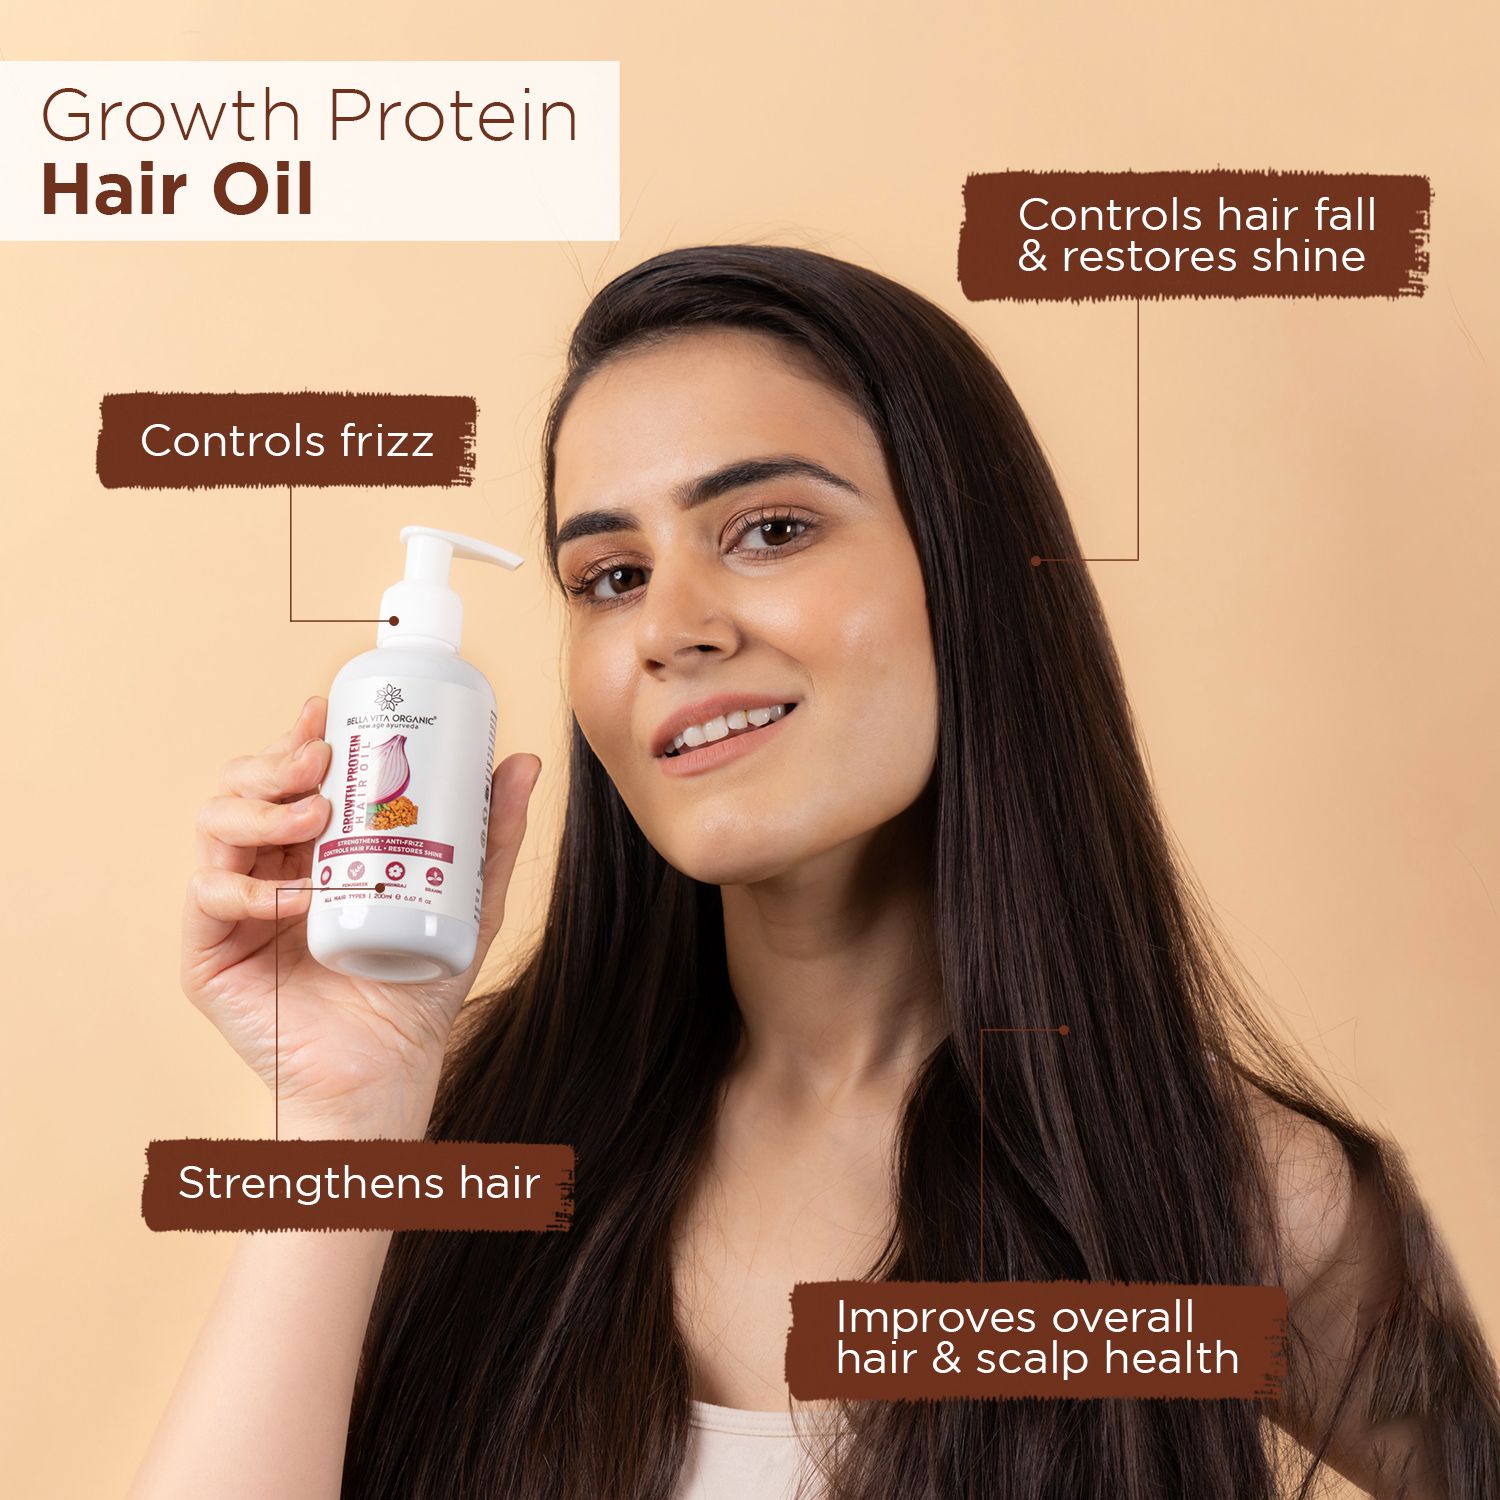 Could Protein Shakes Increase Hair Loss